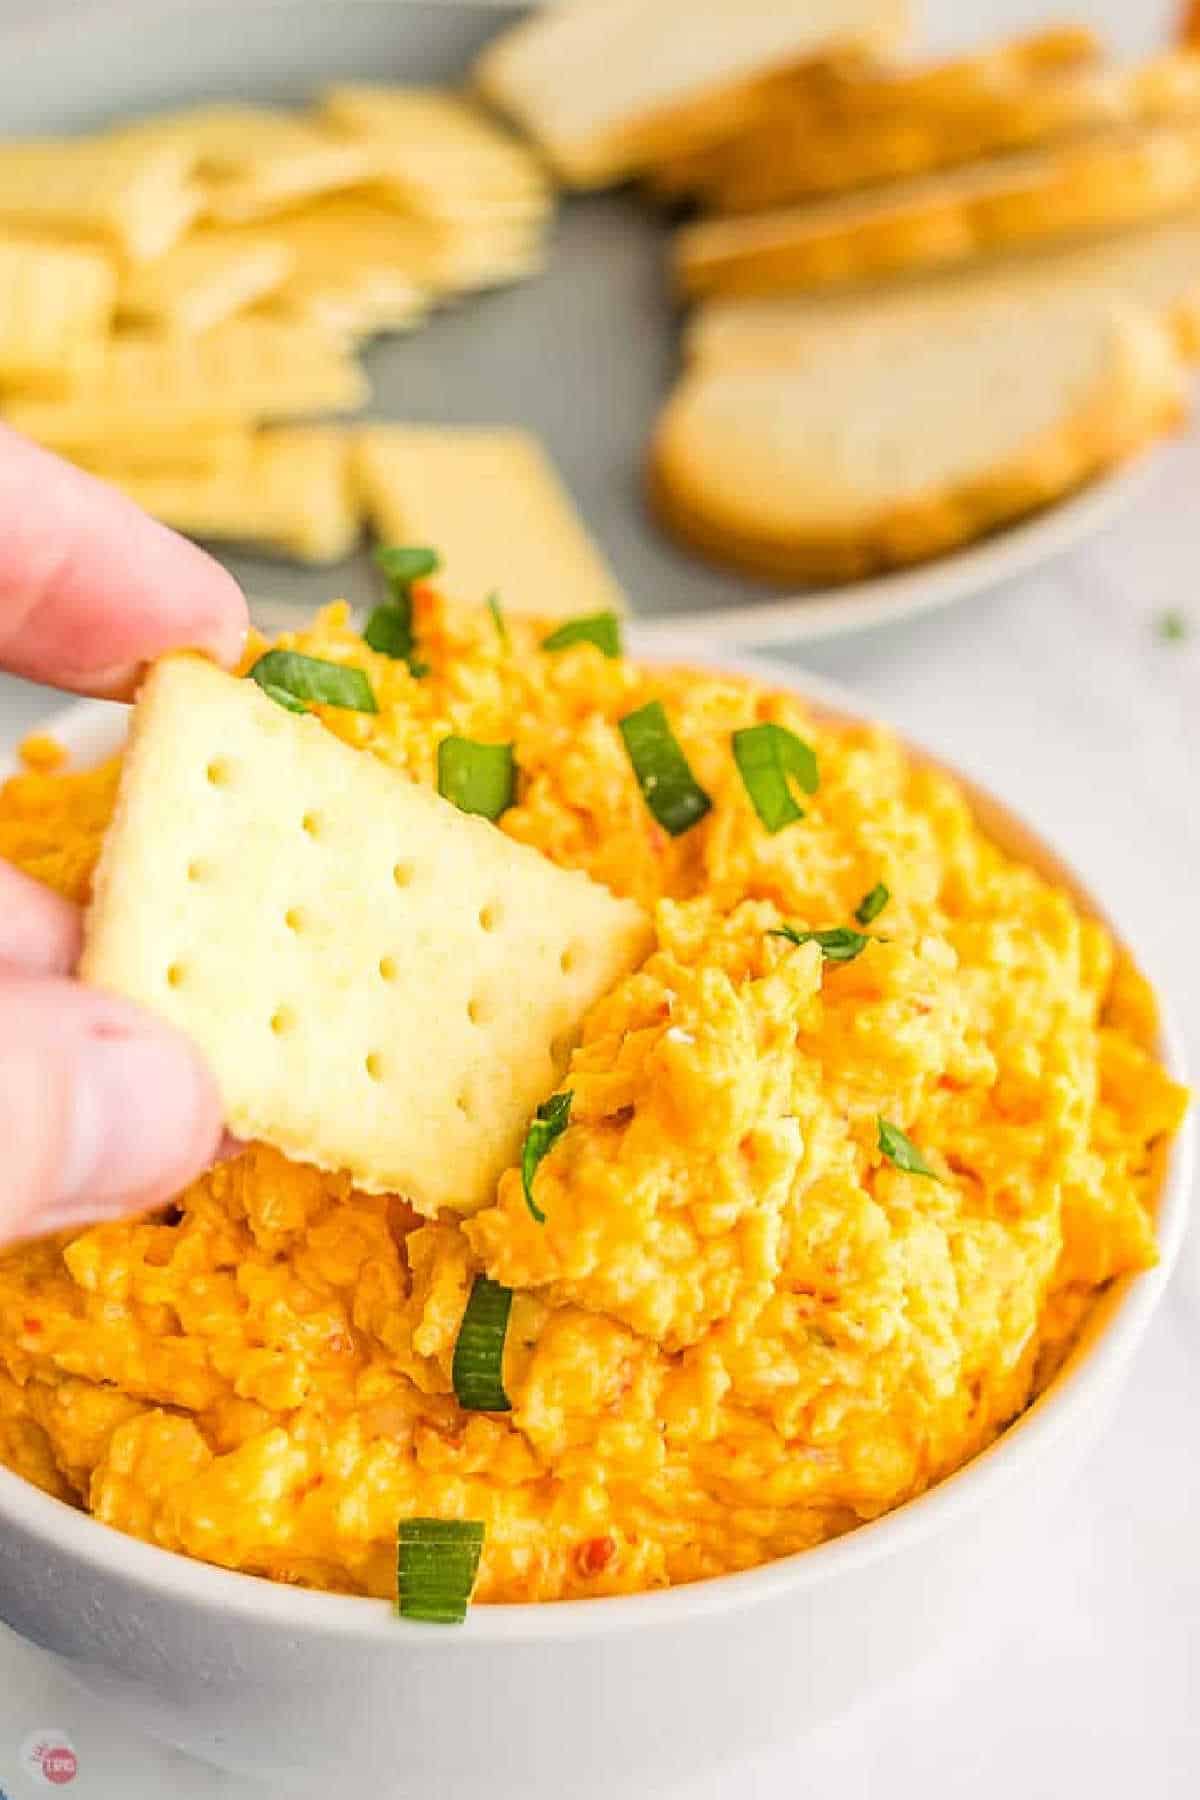 pimento cheese with a cracker